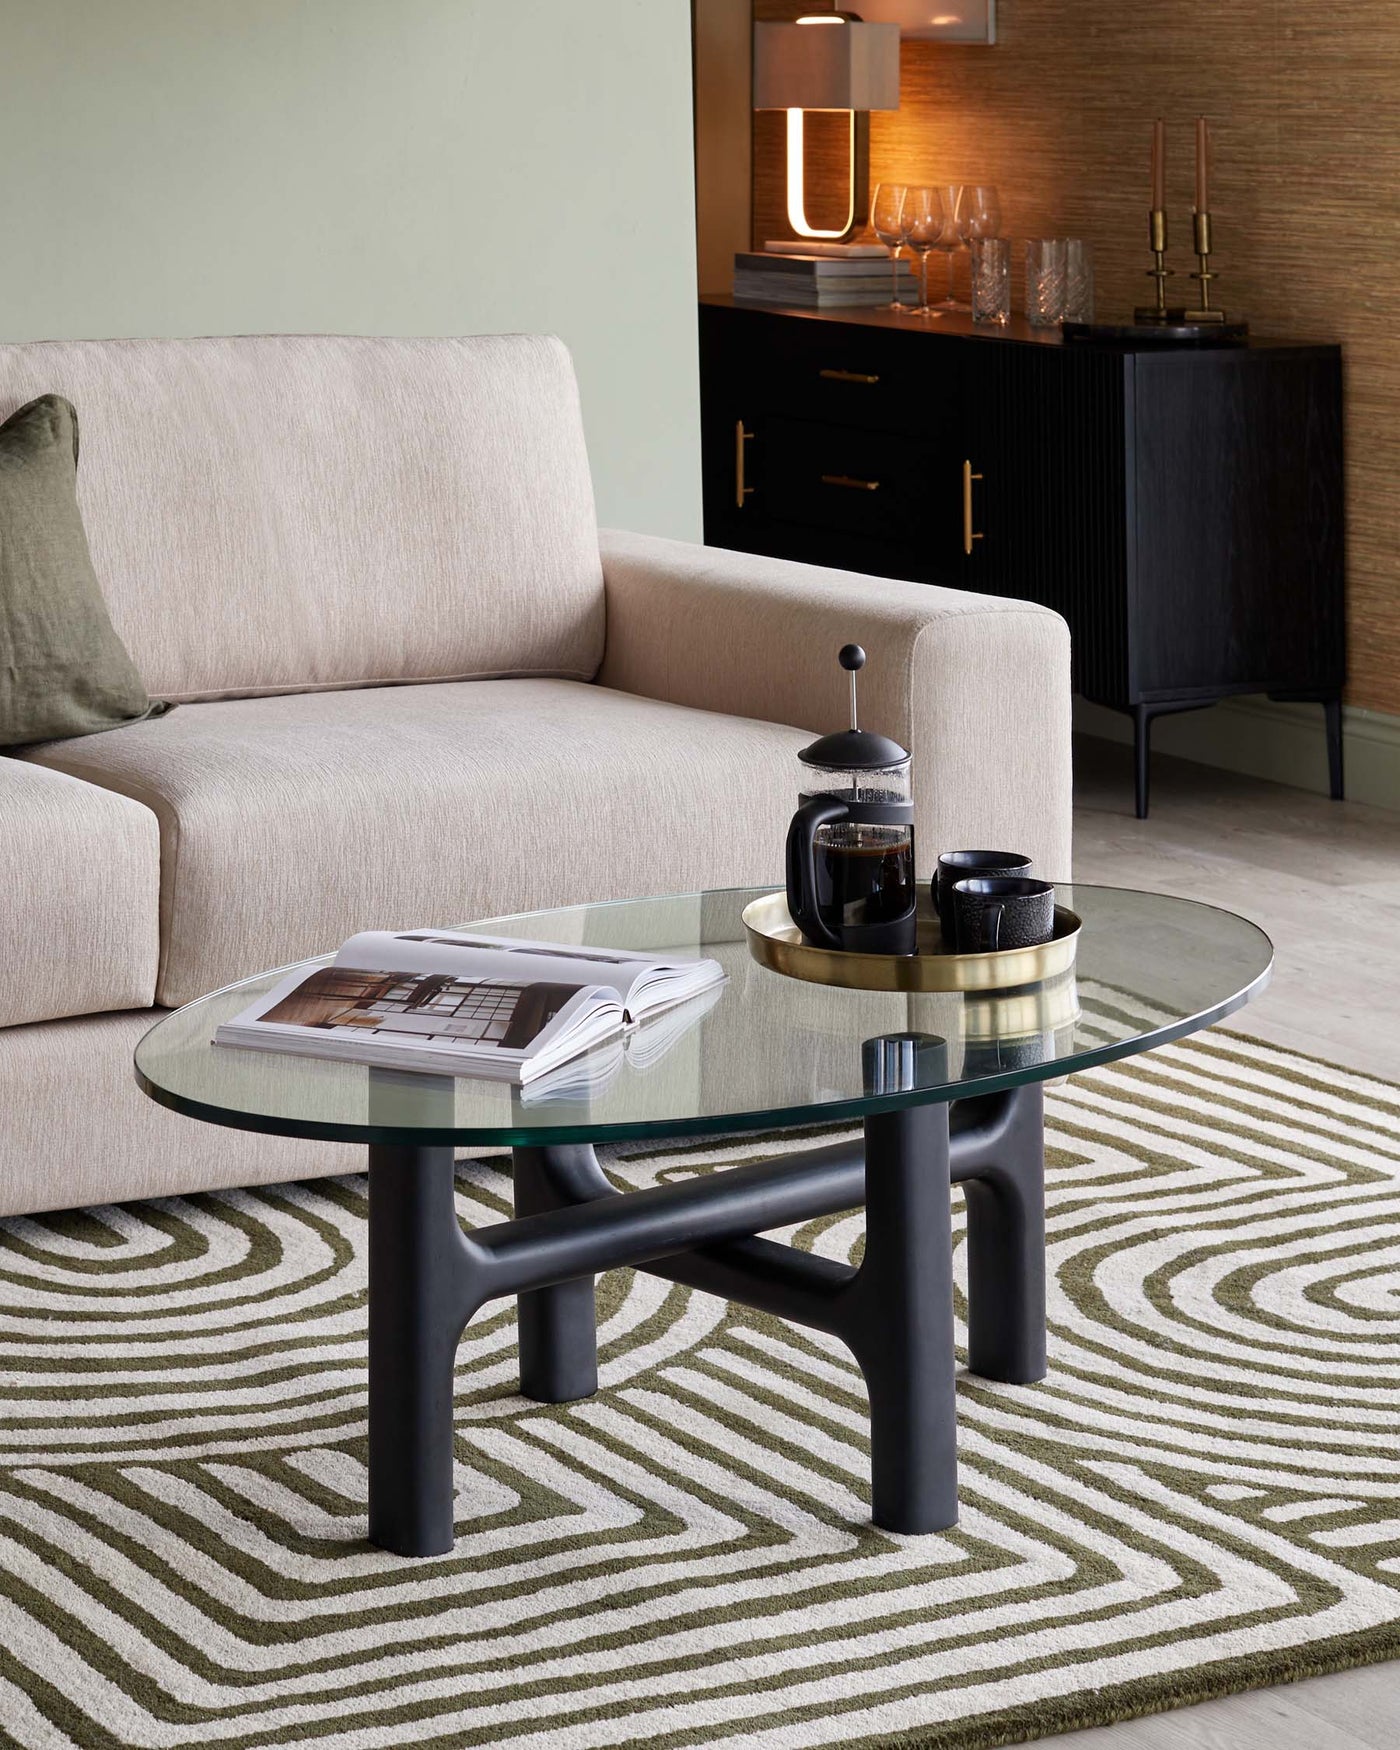 Contemporary living room furniture including a light beige fabric sofa with clean lines and a single green cushion, a round glass coffee table with a unique dark frame, and a black sideboard cabinet with textured doors and brass handles in the background. The ensemble is placed on a patterned beige and green area rug.